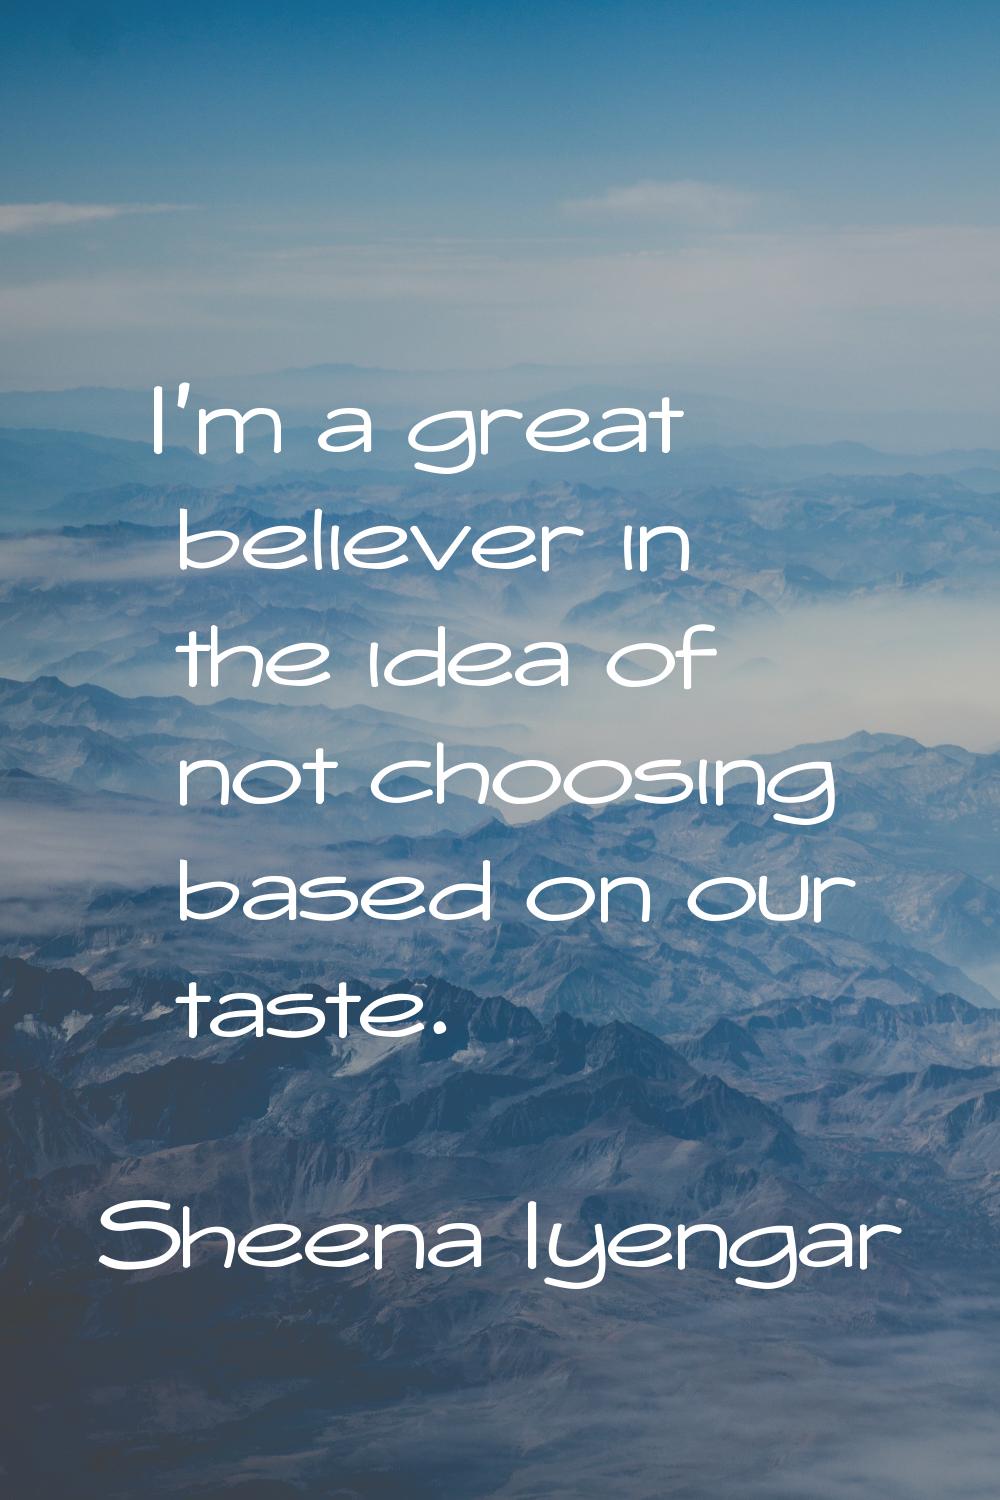 I'm a great believer in the idea of not choosing based on our taste.